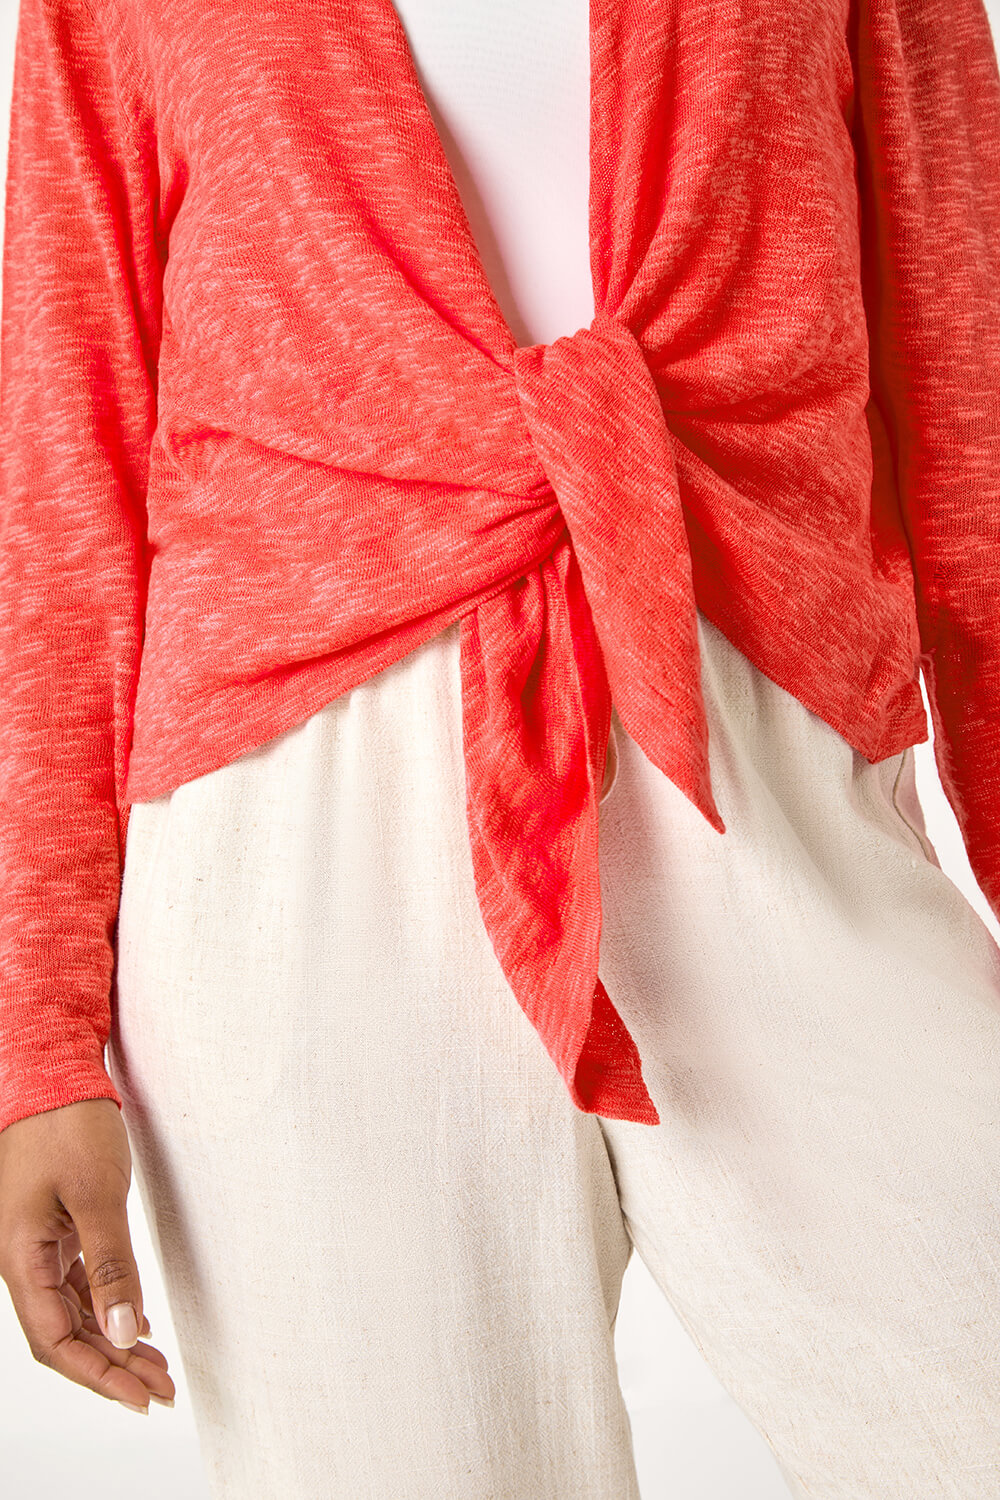 CORAL Petite Waterfall Front Cotton Knit Cardigan, Image 5 of 5